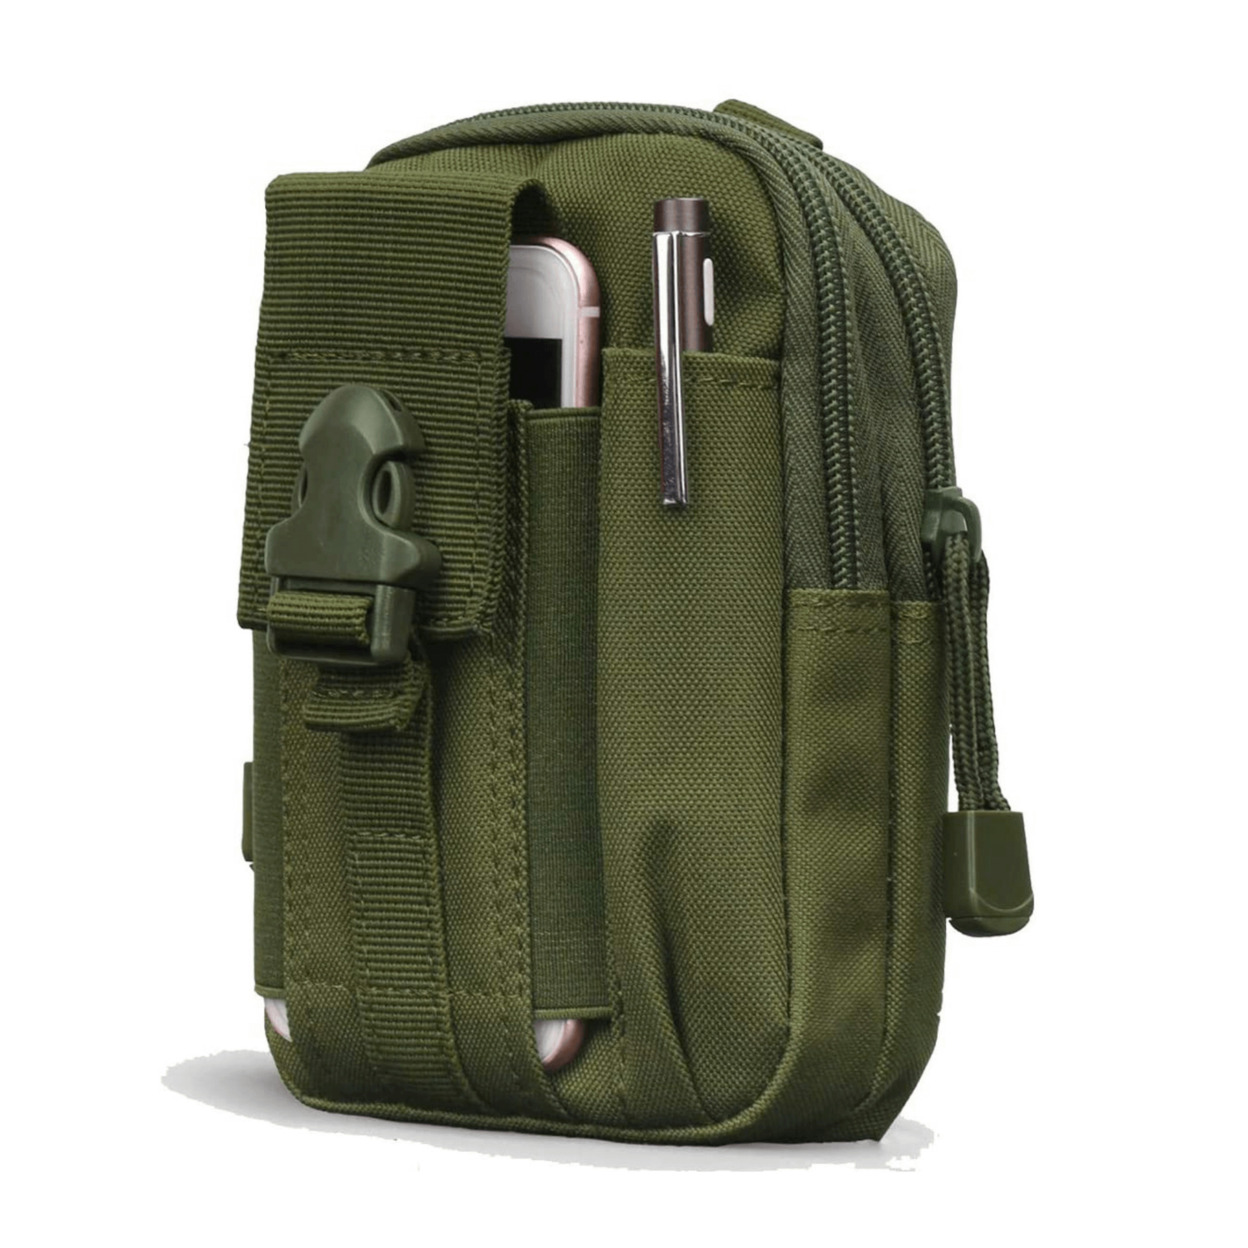 Tactical MOLLE Pouch & Waist Bag For Hiking & Outdoor Activities - Camo